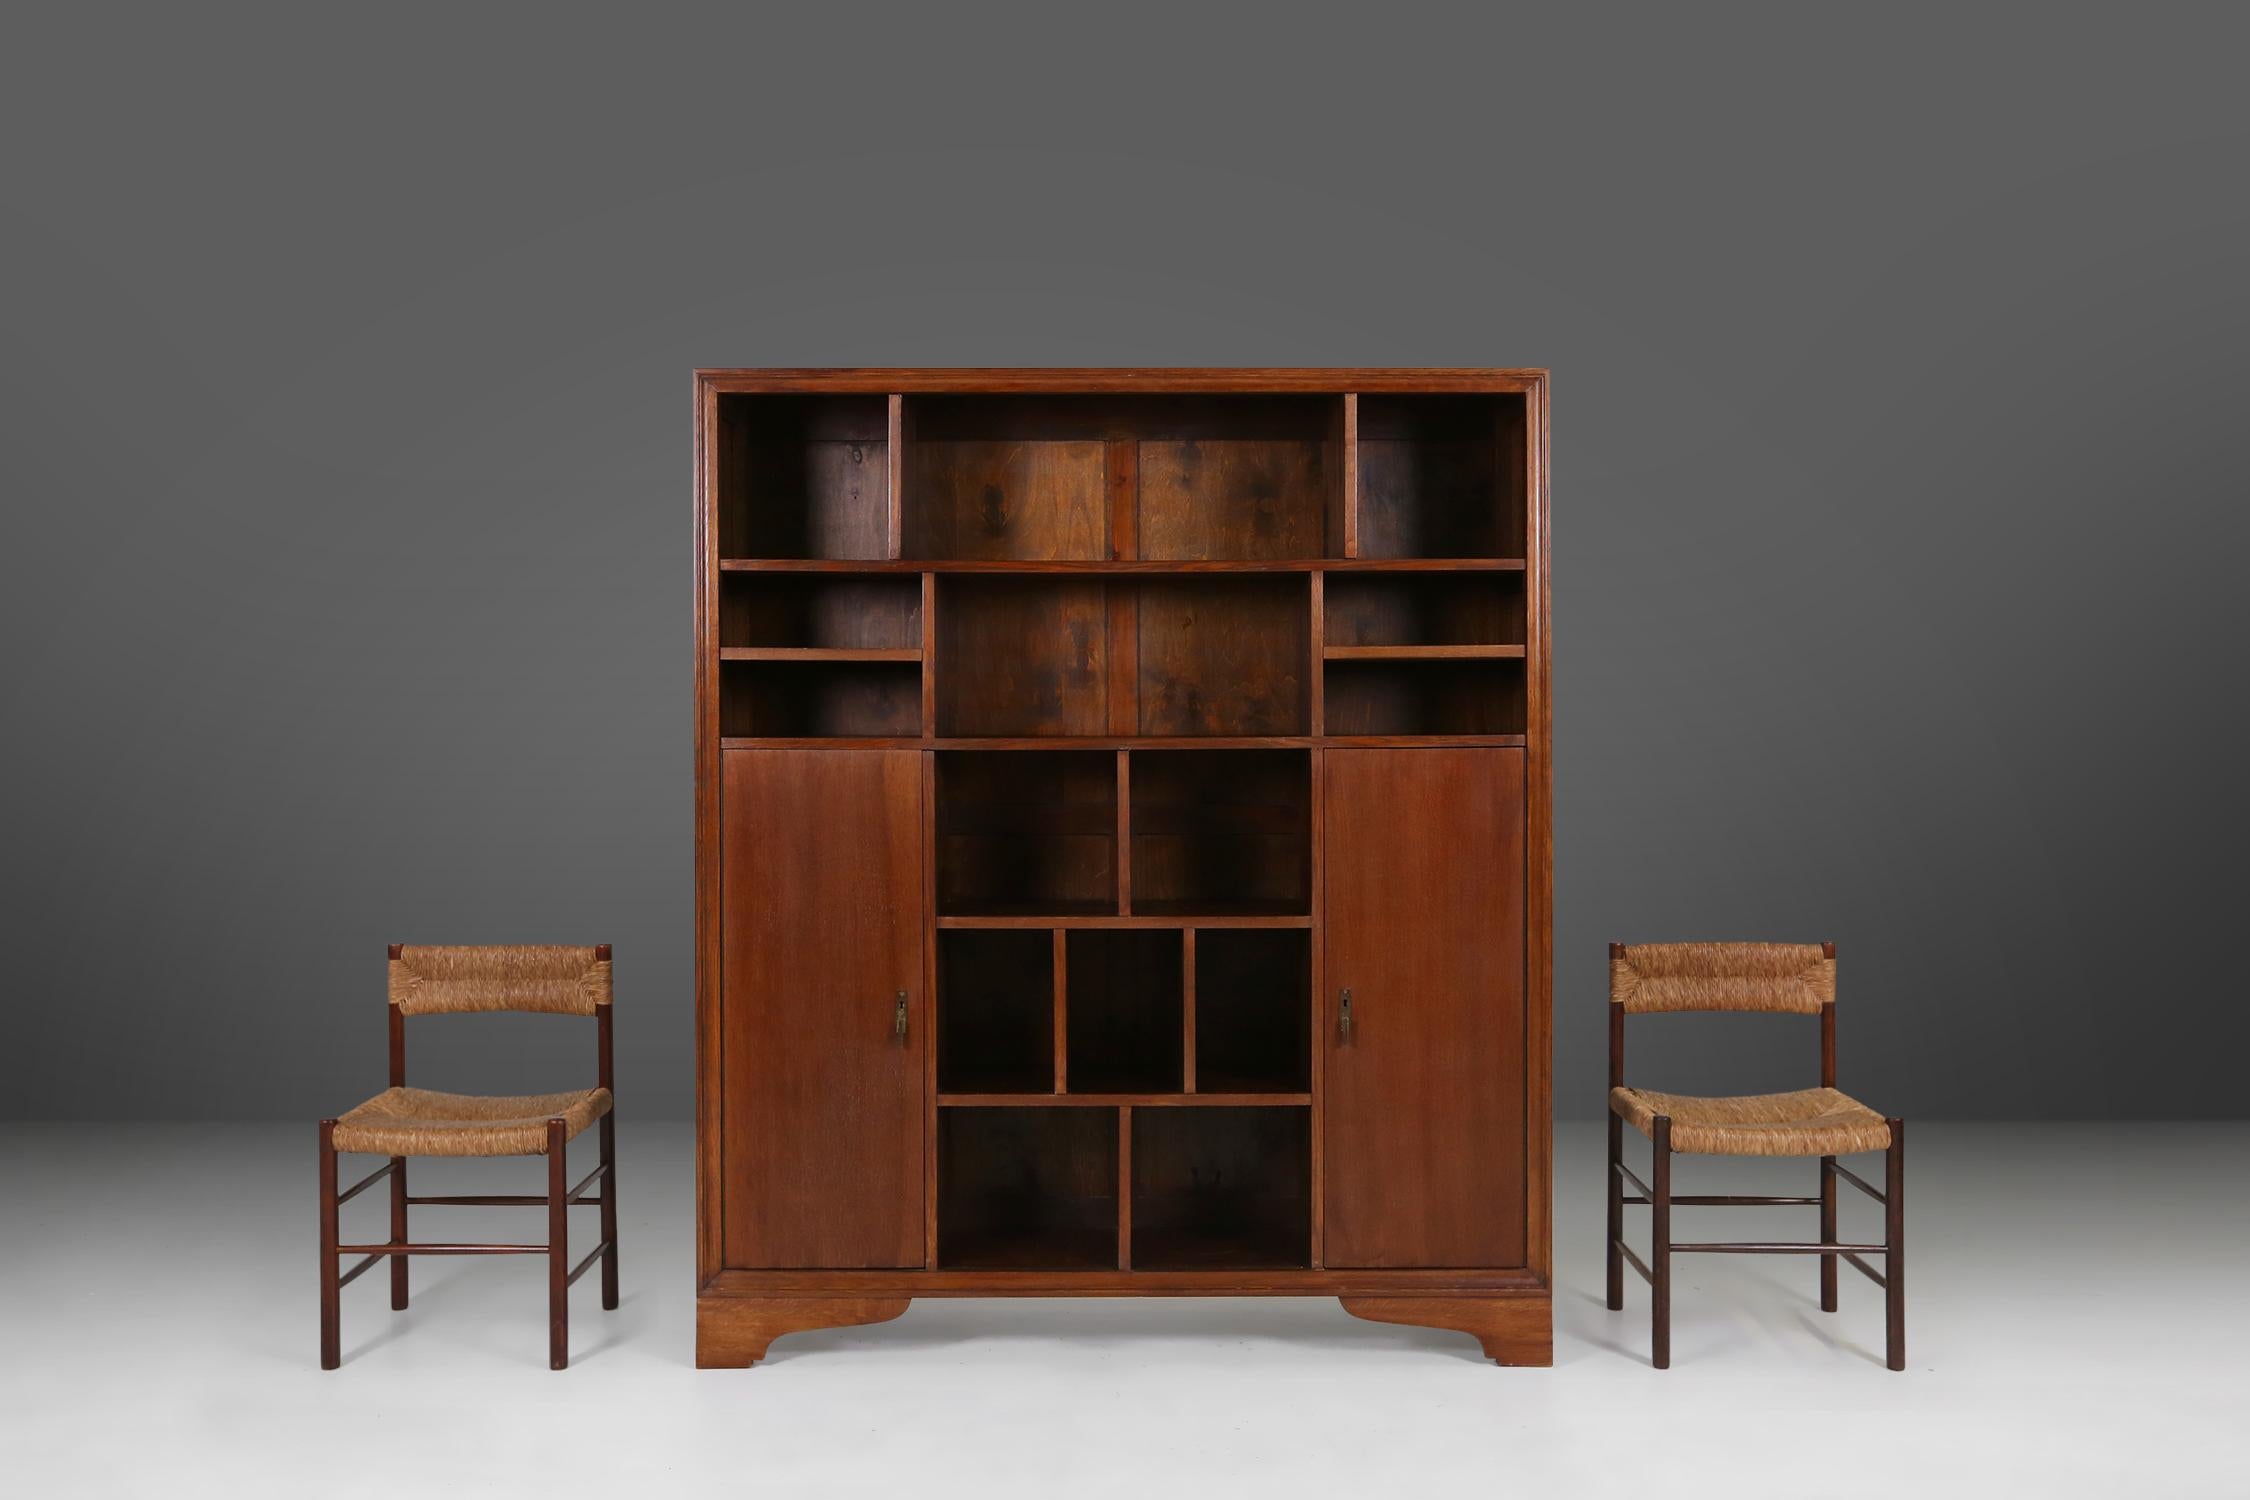 France / 1940 / Art Deco / cabinet / wood / 2 doors and many storage compartments / Mid-century / vintage design

This stunning vintage bookcase from France, dating back to the 1940s, is a true masterpiece of Art Deco design. Crafted from